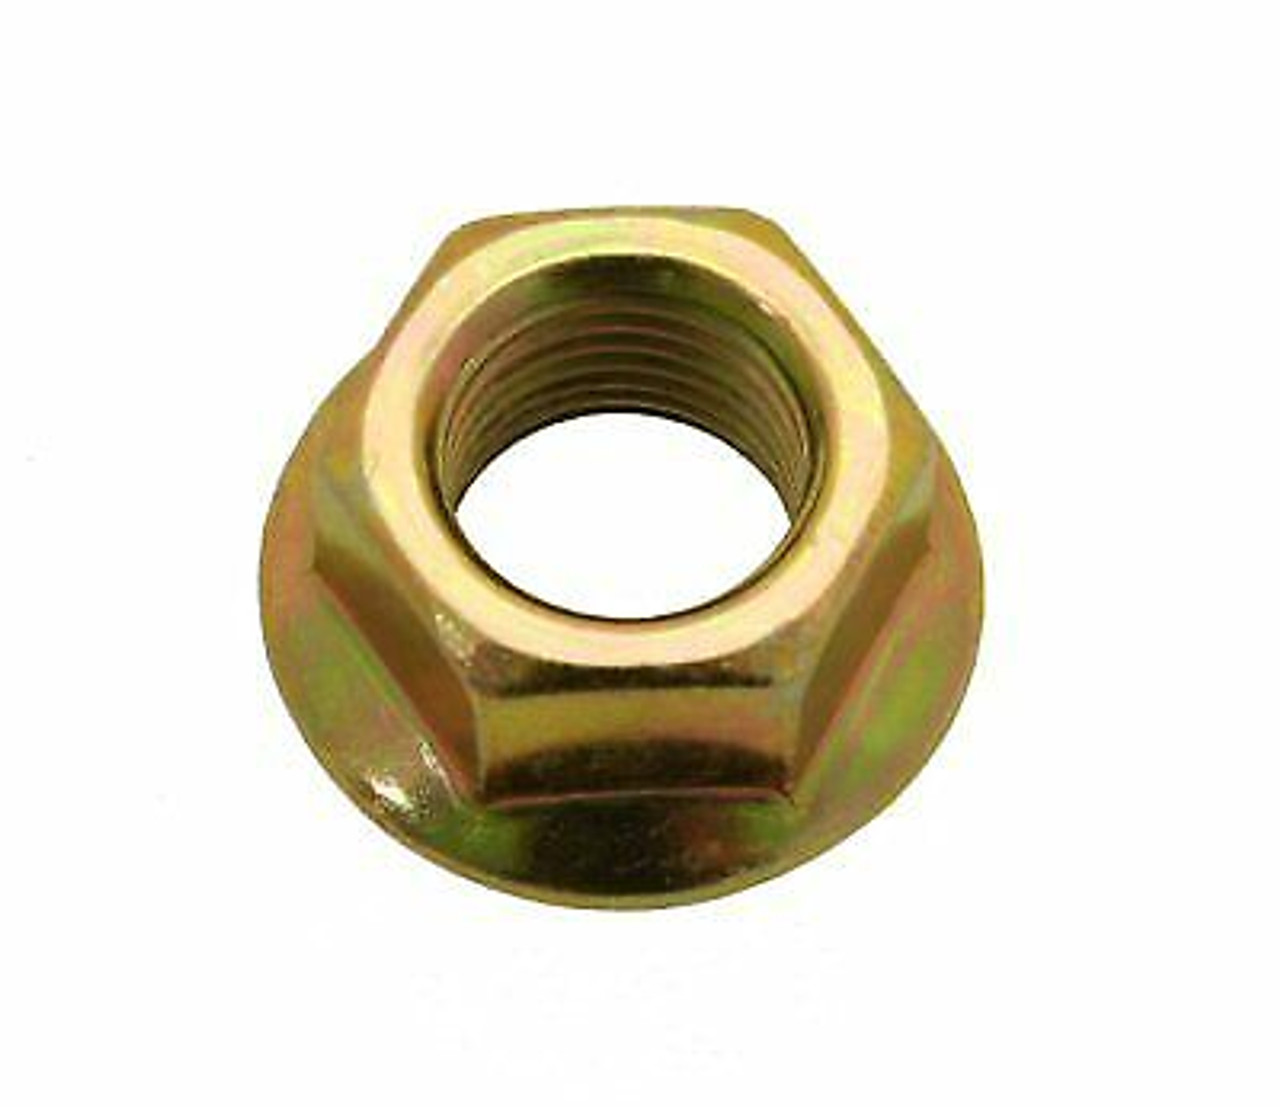 M12 CLUTCH FLANGE NUT FOR SCOOTER WITH GY6 150cc MOTORS 